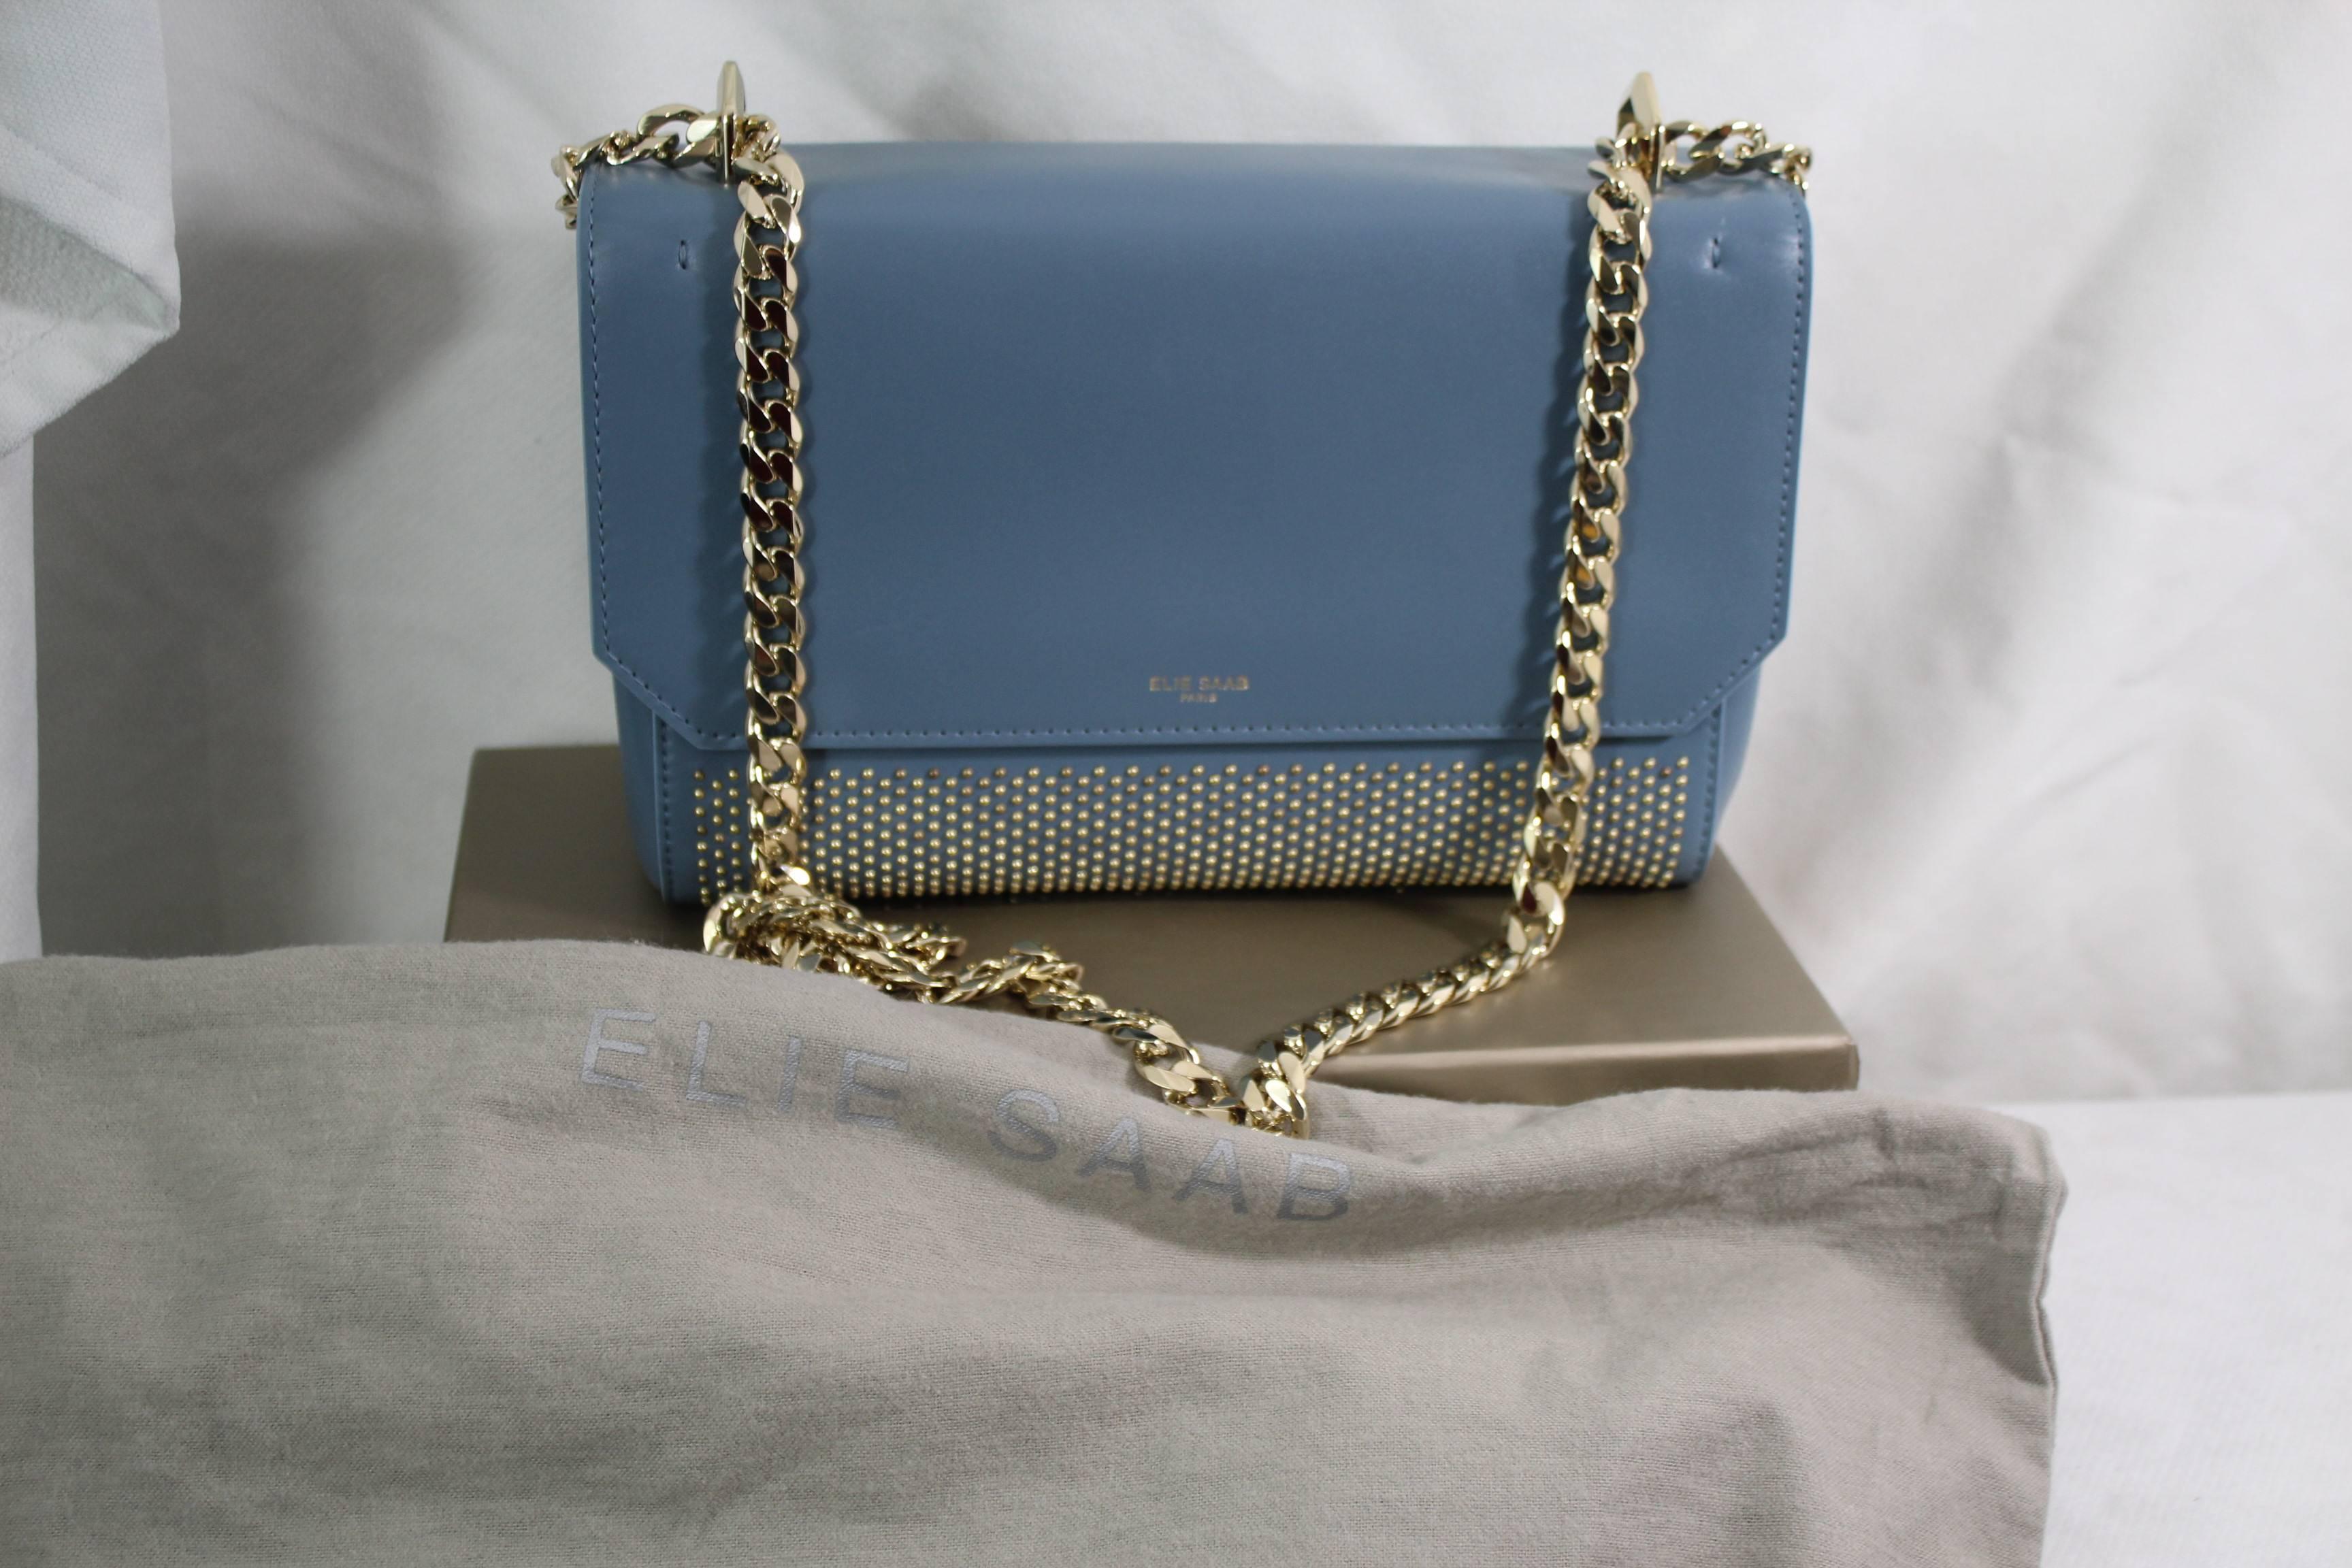 New never used Elie Saab leather bag in a really nice bleu color and golden hardware and studs.

Sold with box and dust baag and papers.

Size 23x15 cm